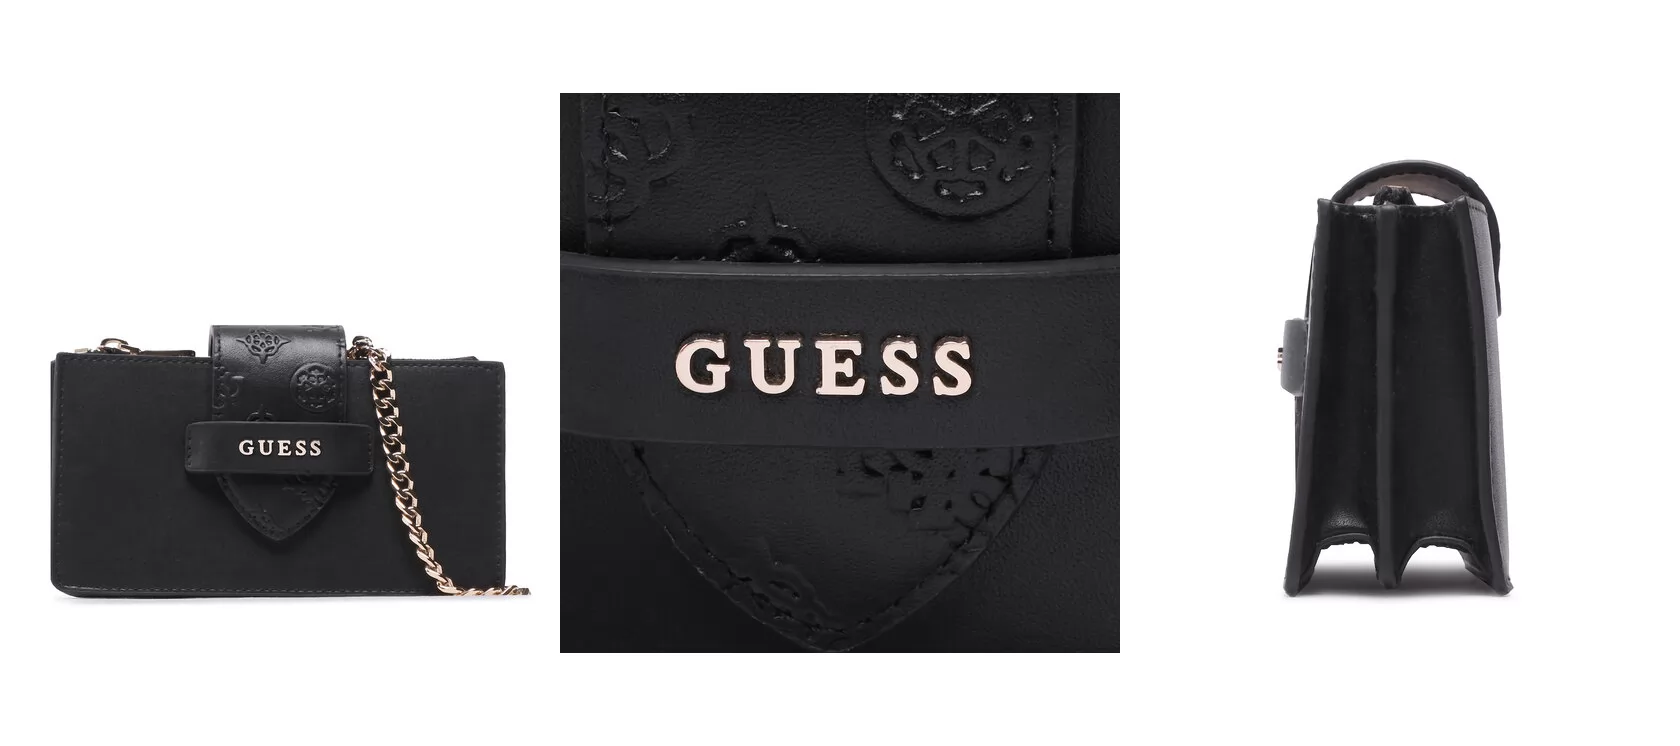 Guess Torebka Not Coordinated Accessories PW1534 P3135 Czarny